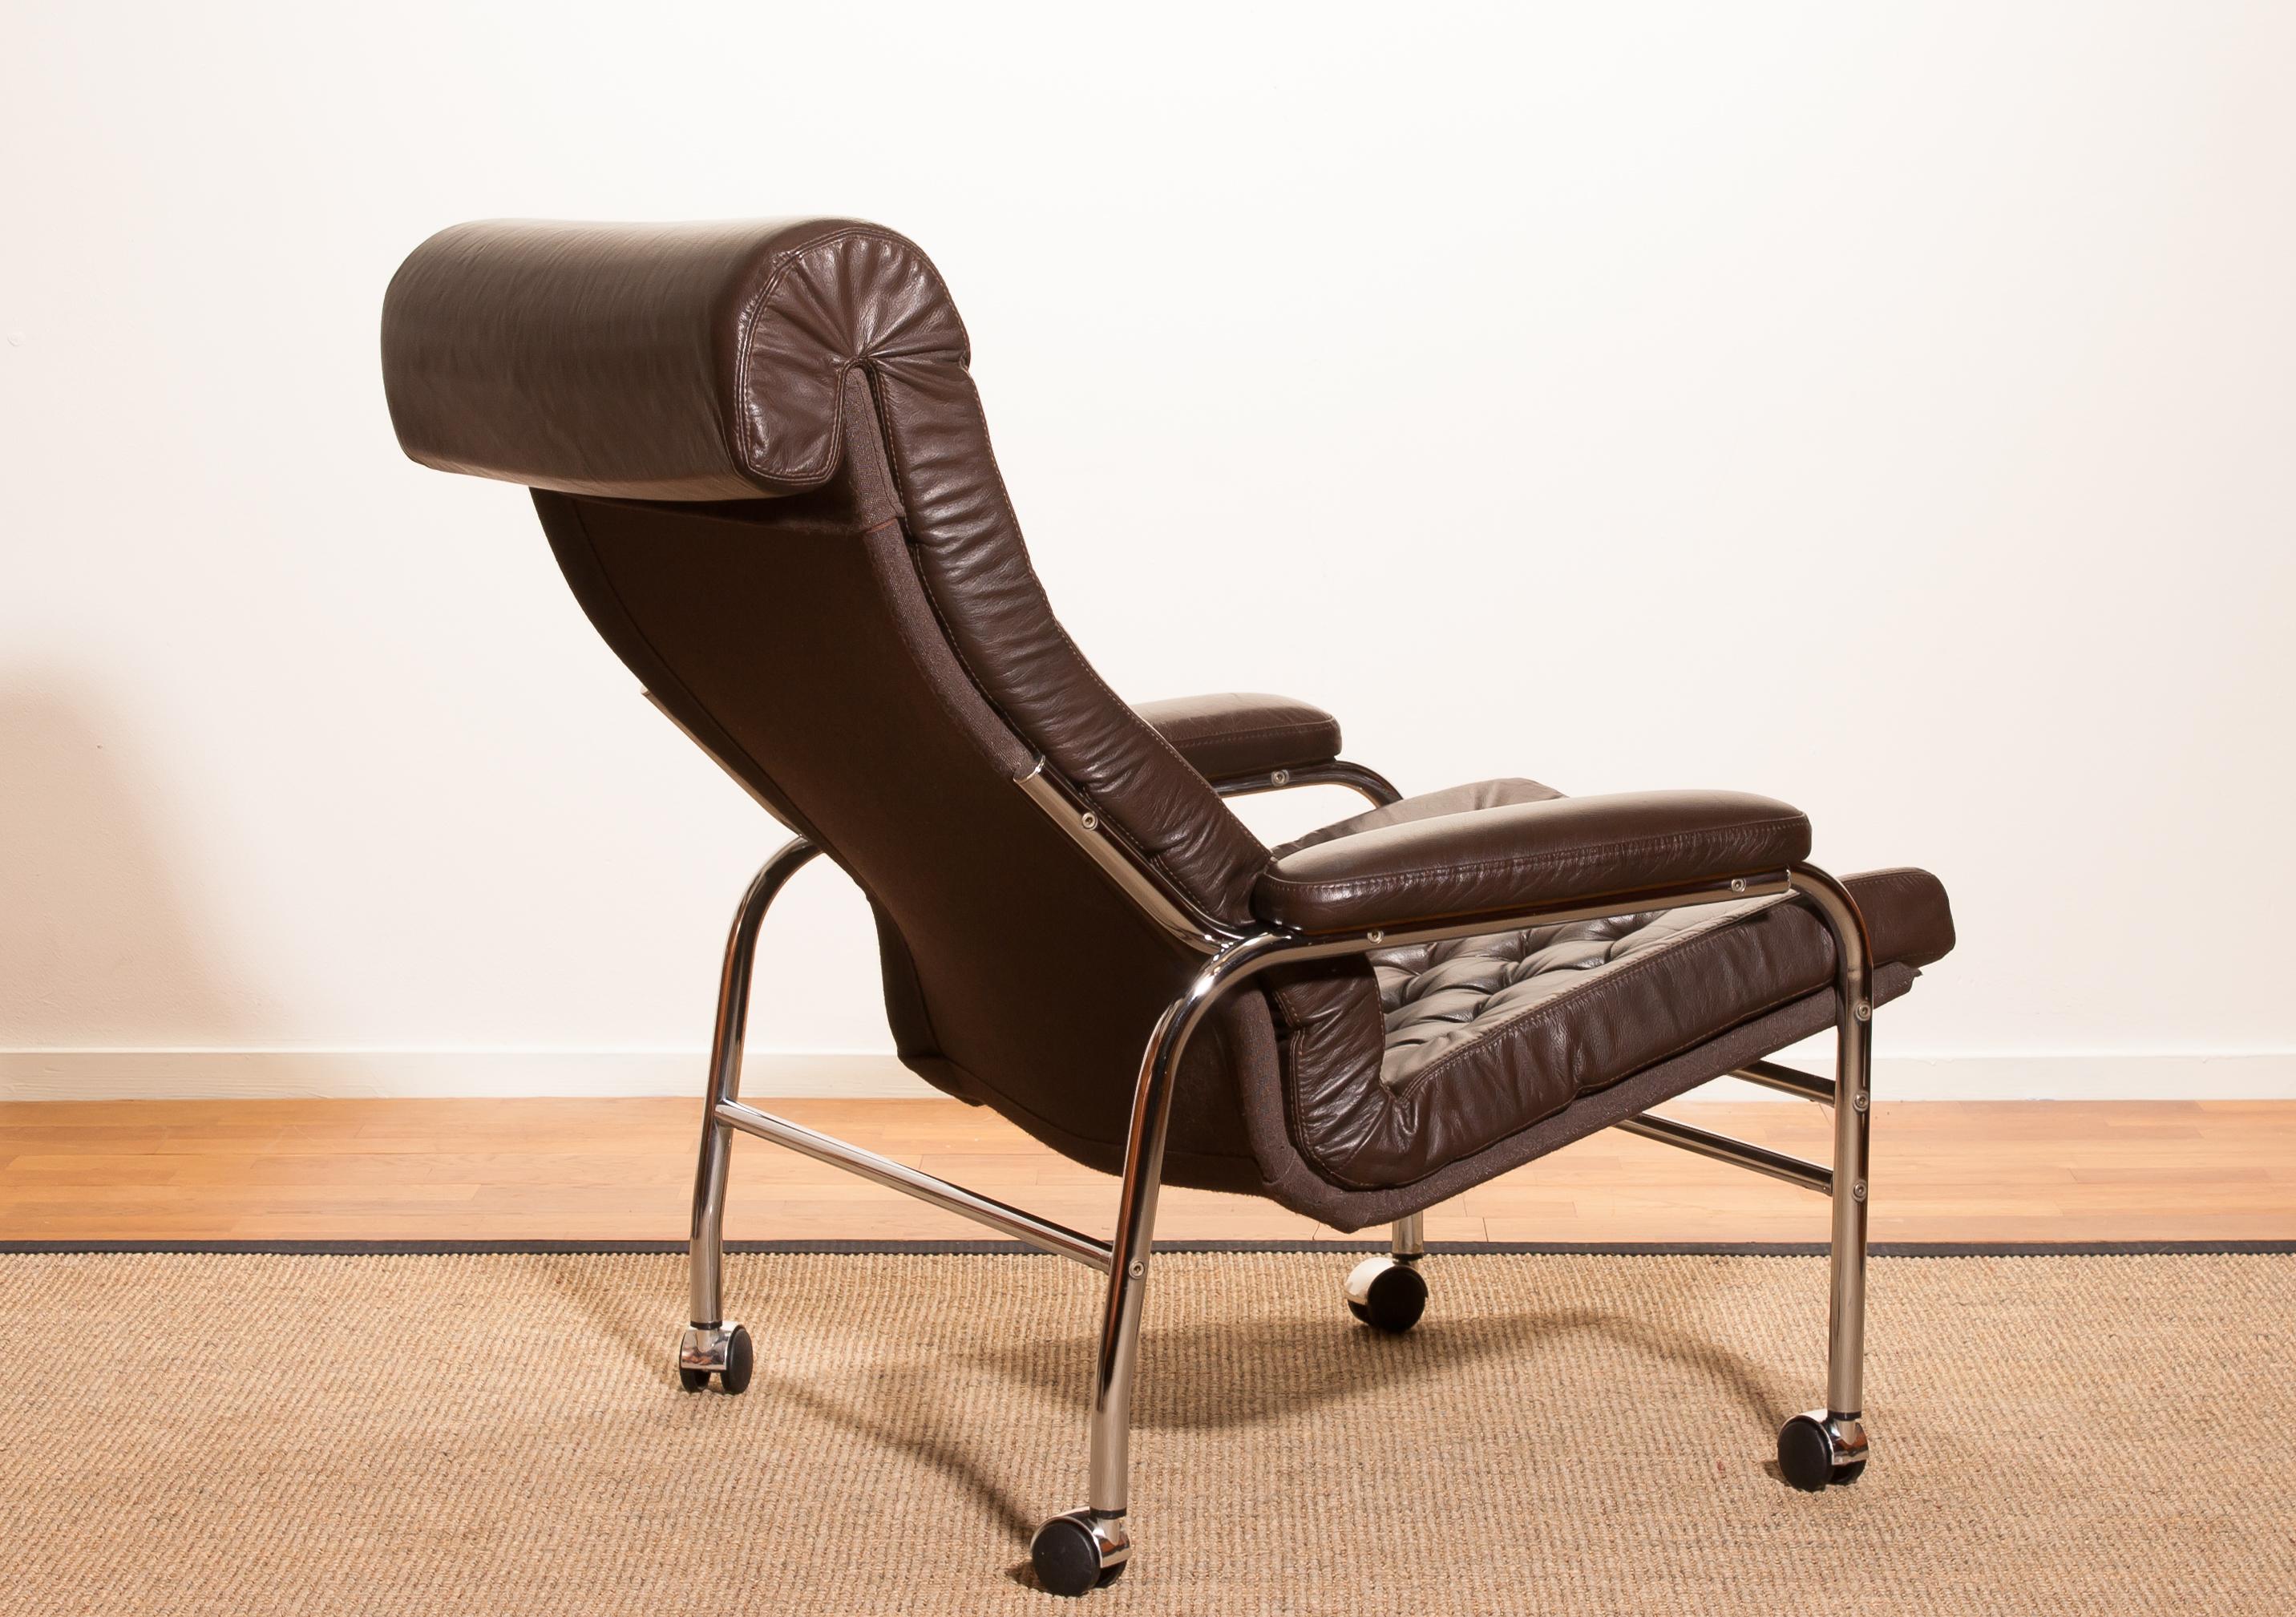 Beautiful and rare lounge chair designed by Noboru Nakamura, Sweden.
This chair has a dark brown leather seating on a chromed tubular wheeled frame.
It is in a mint condition,
circa 1970s
Dimensions: H 90 cm x W 78 cm x D 93 cm x SH 40 cm.